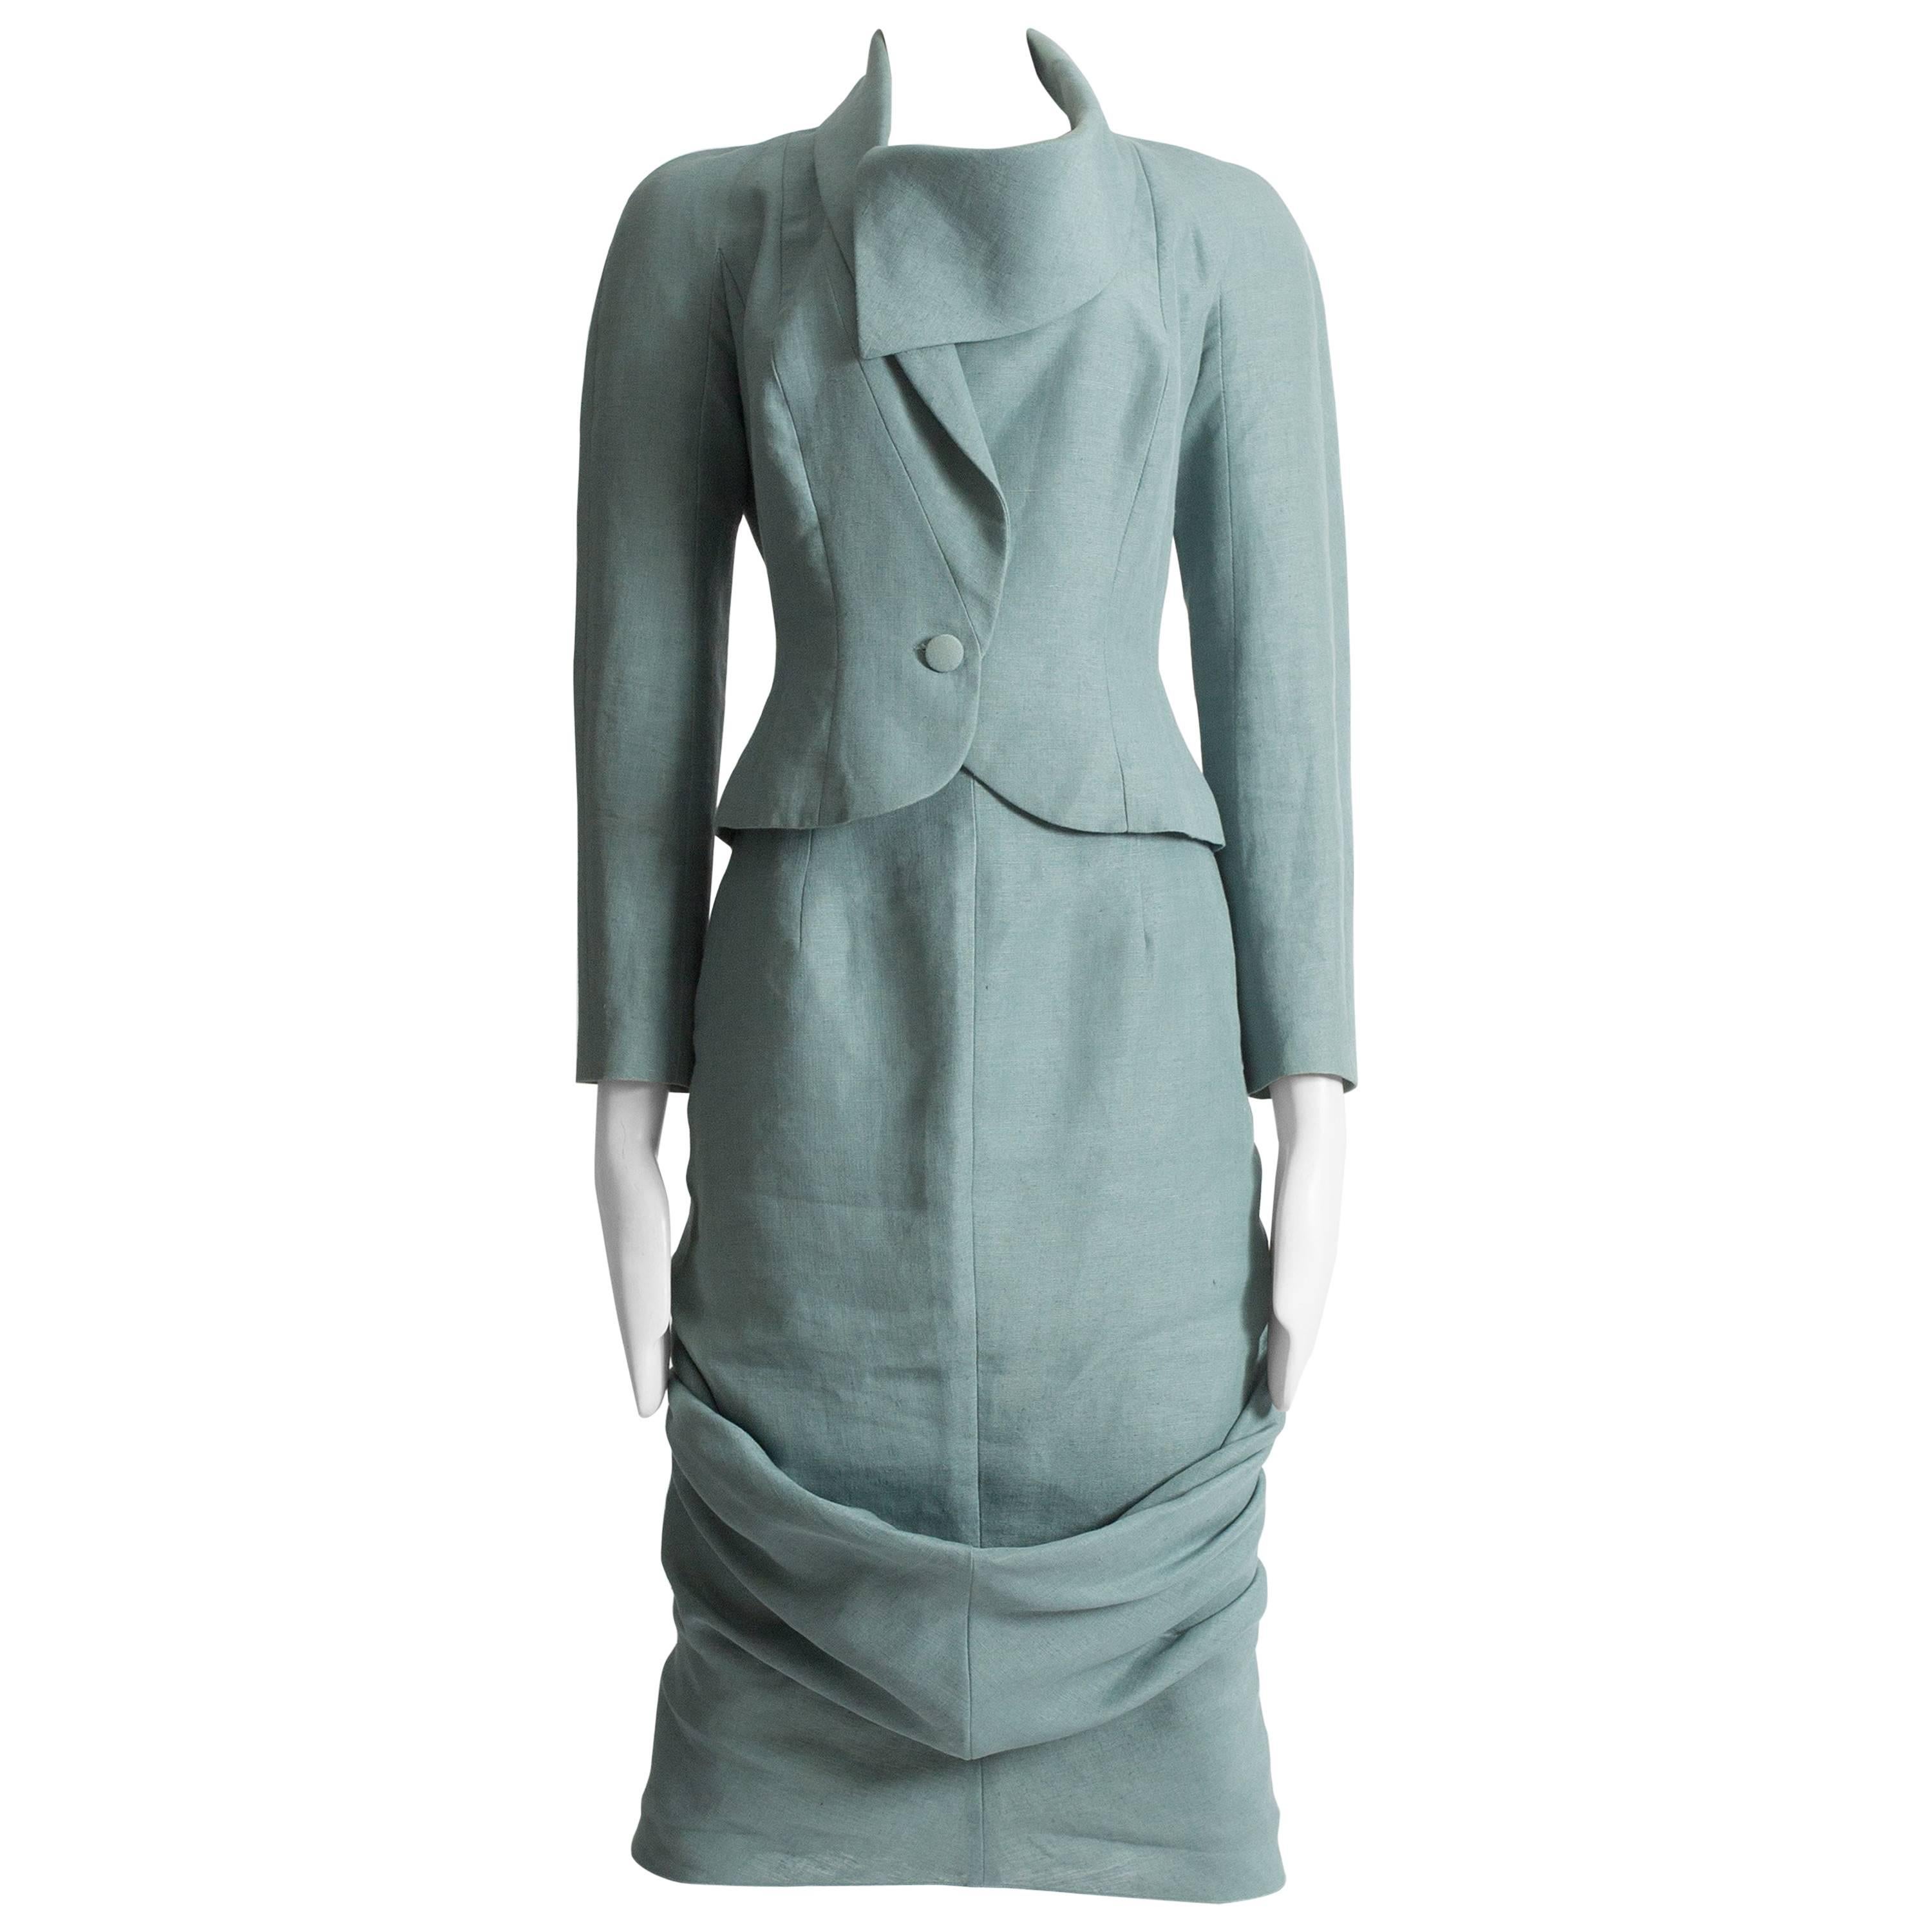 John Galliano teal linen jacket and draped skirt suit, ss 1999